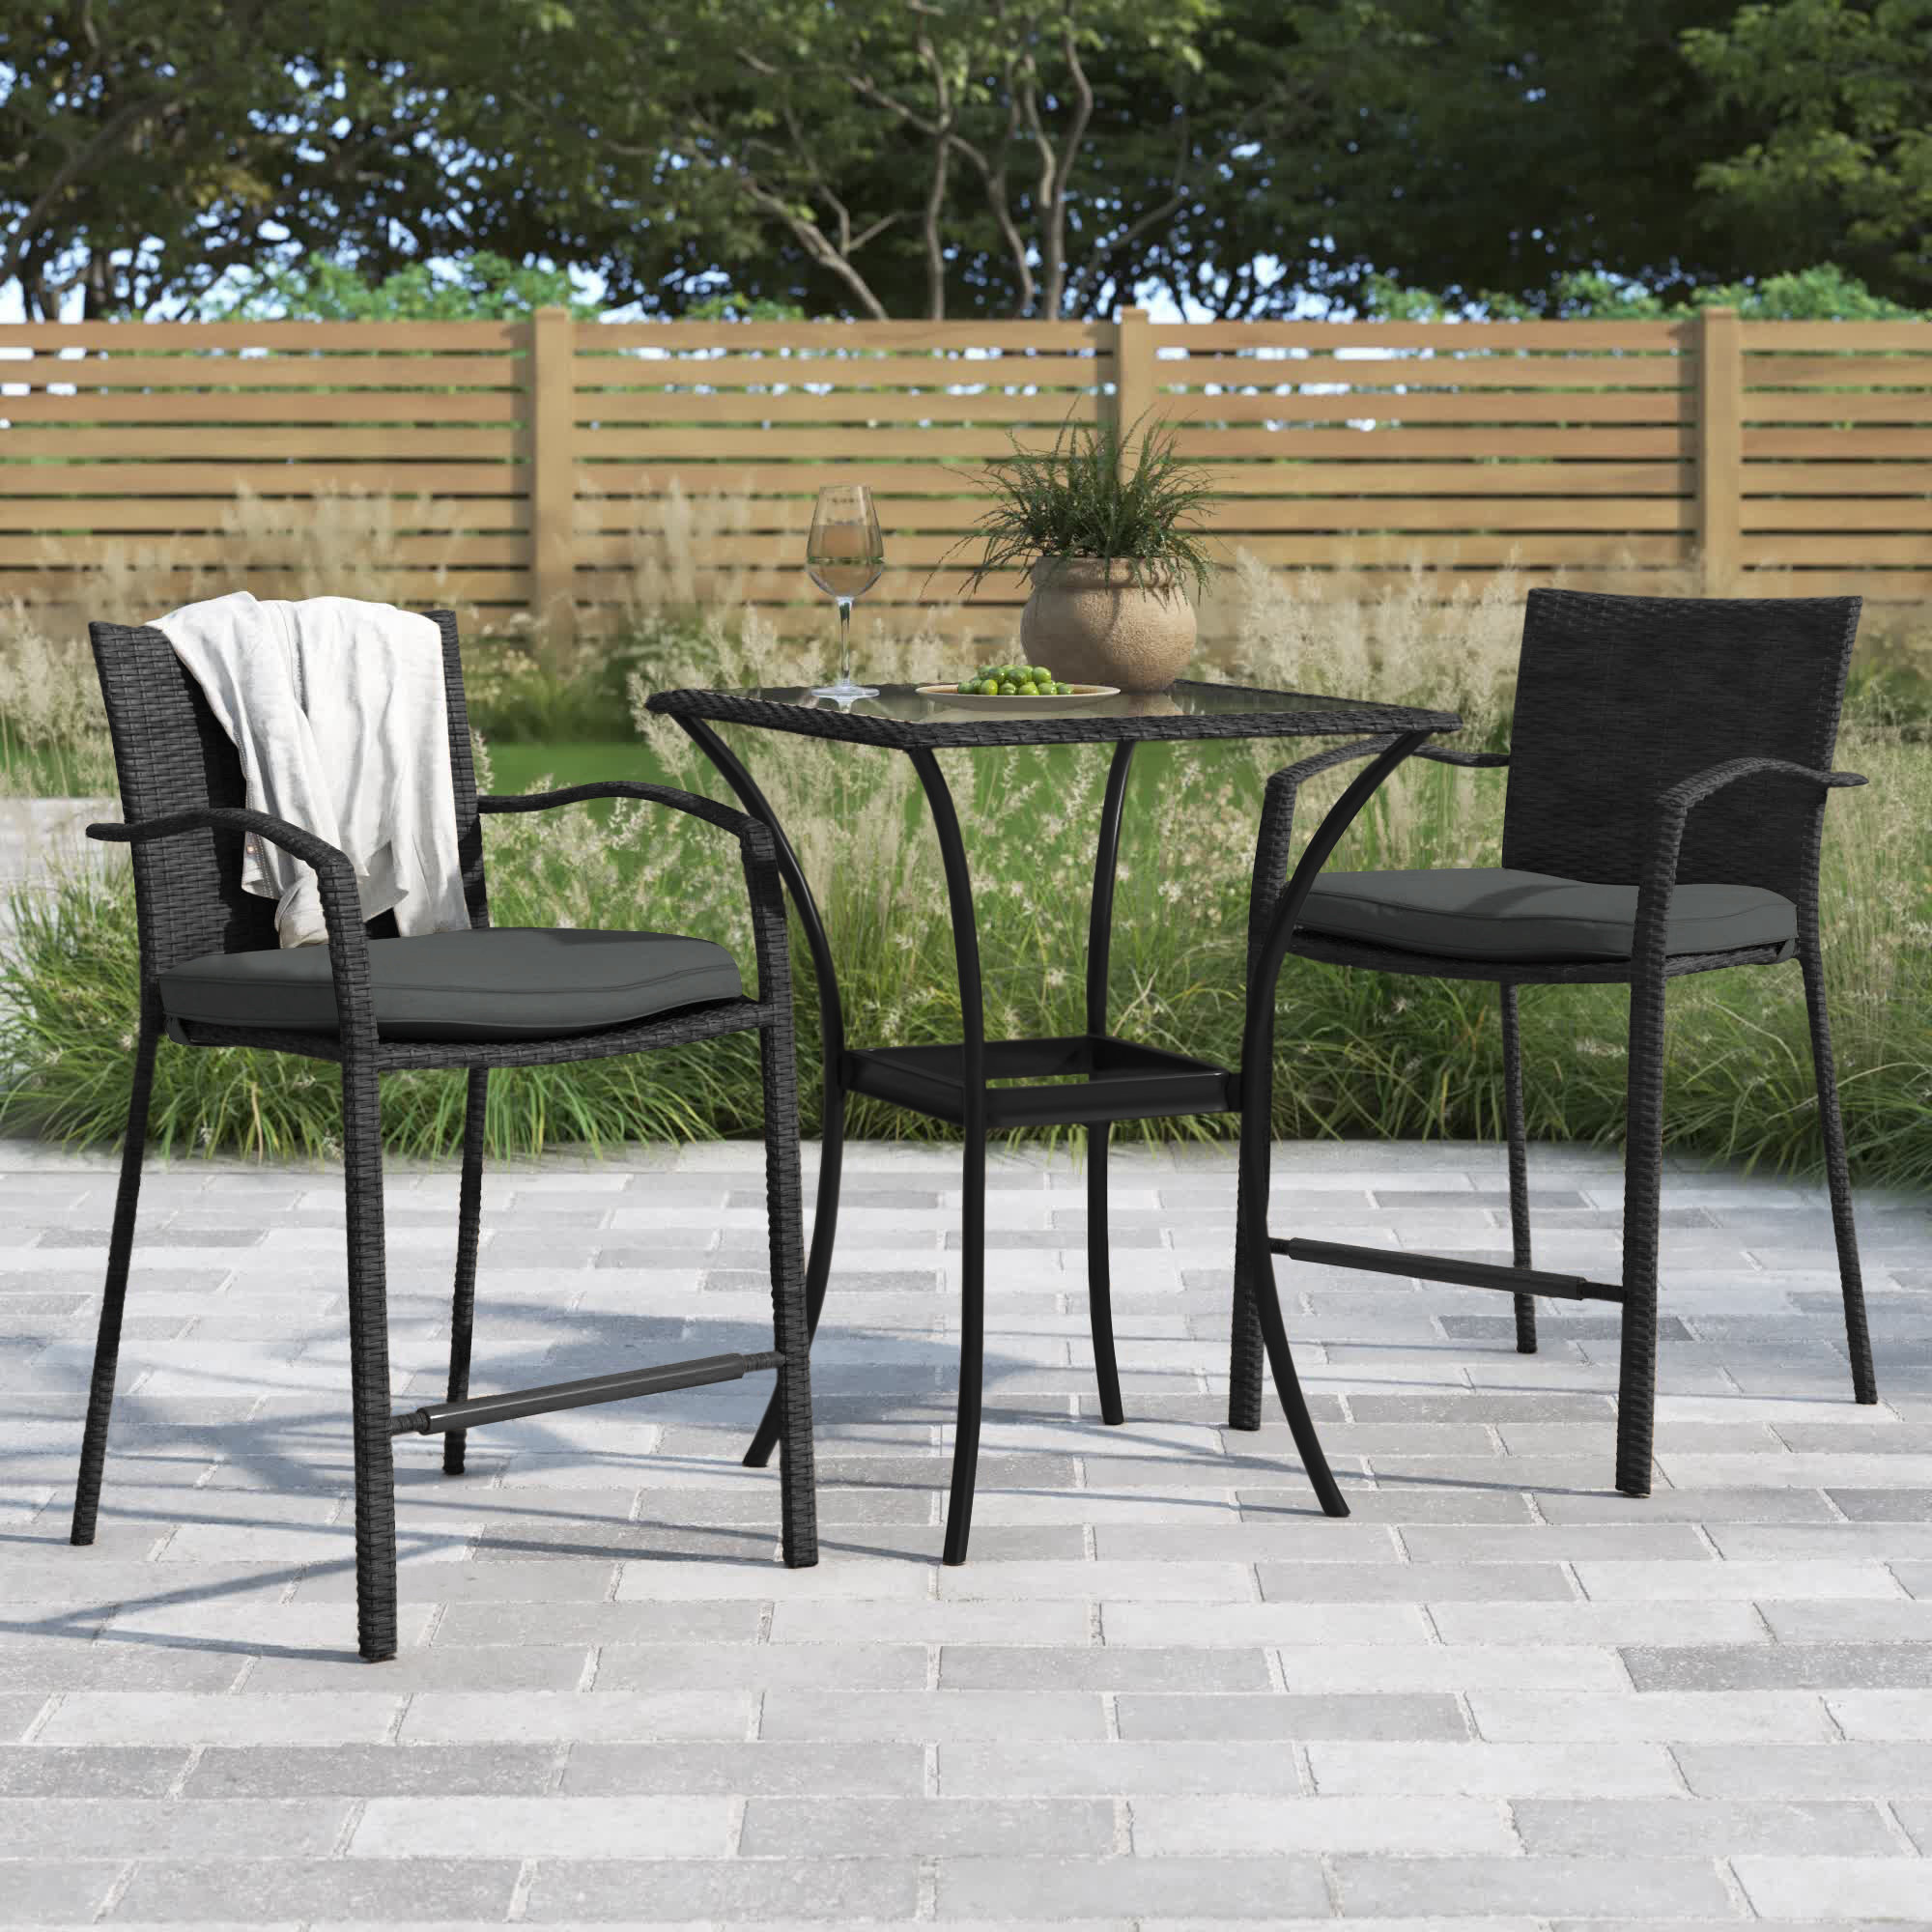 Image of Black bistro patio set with square table and two metal chairs